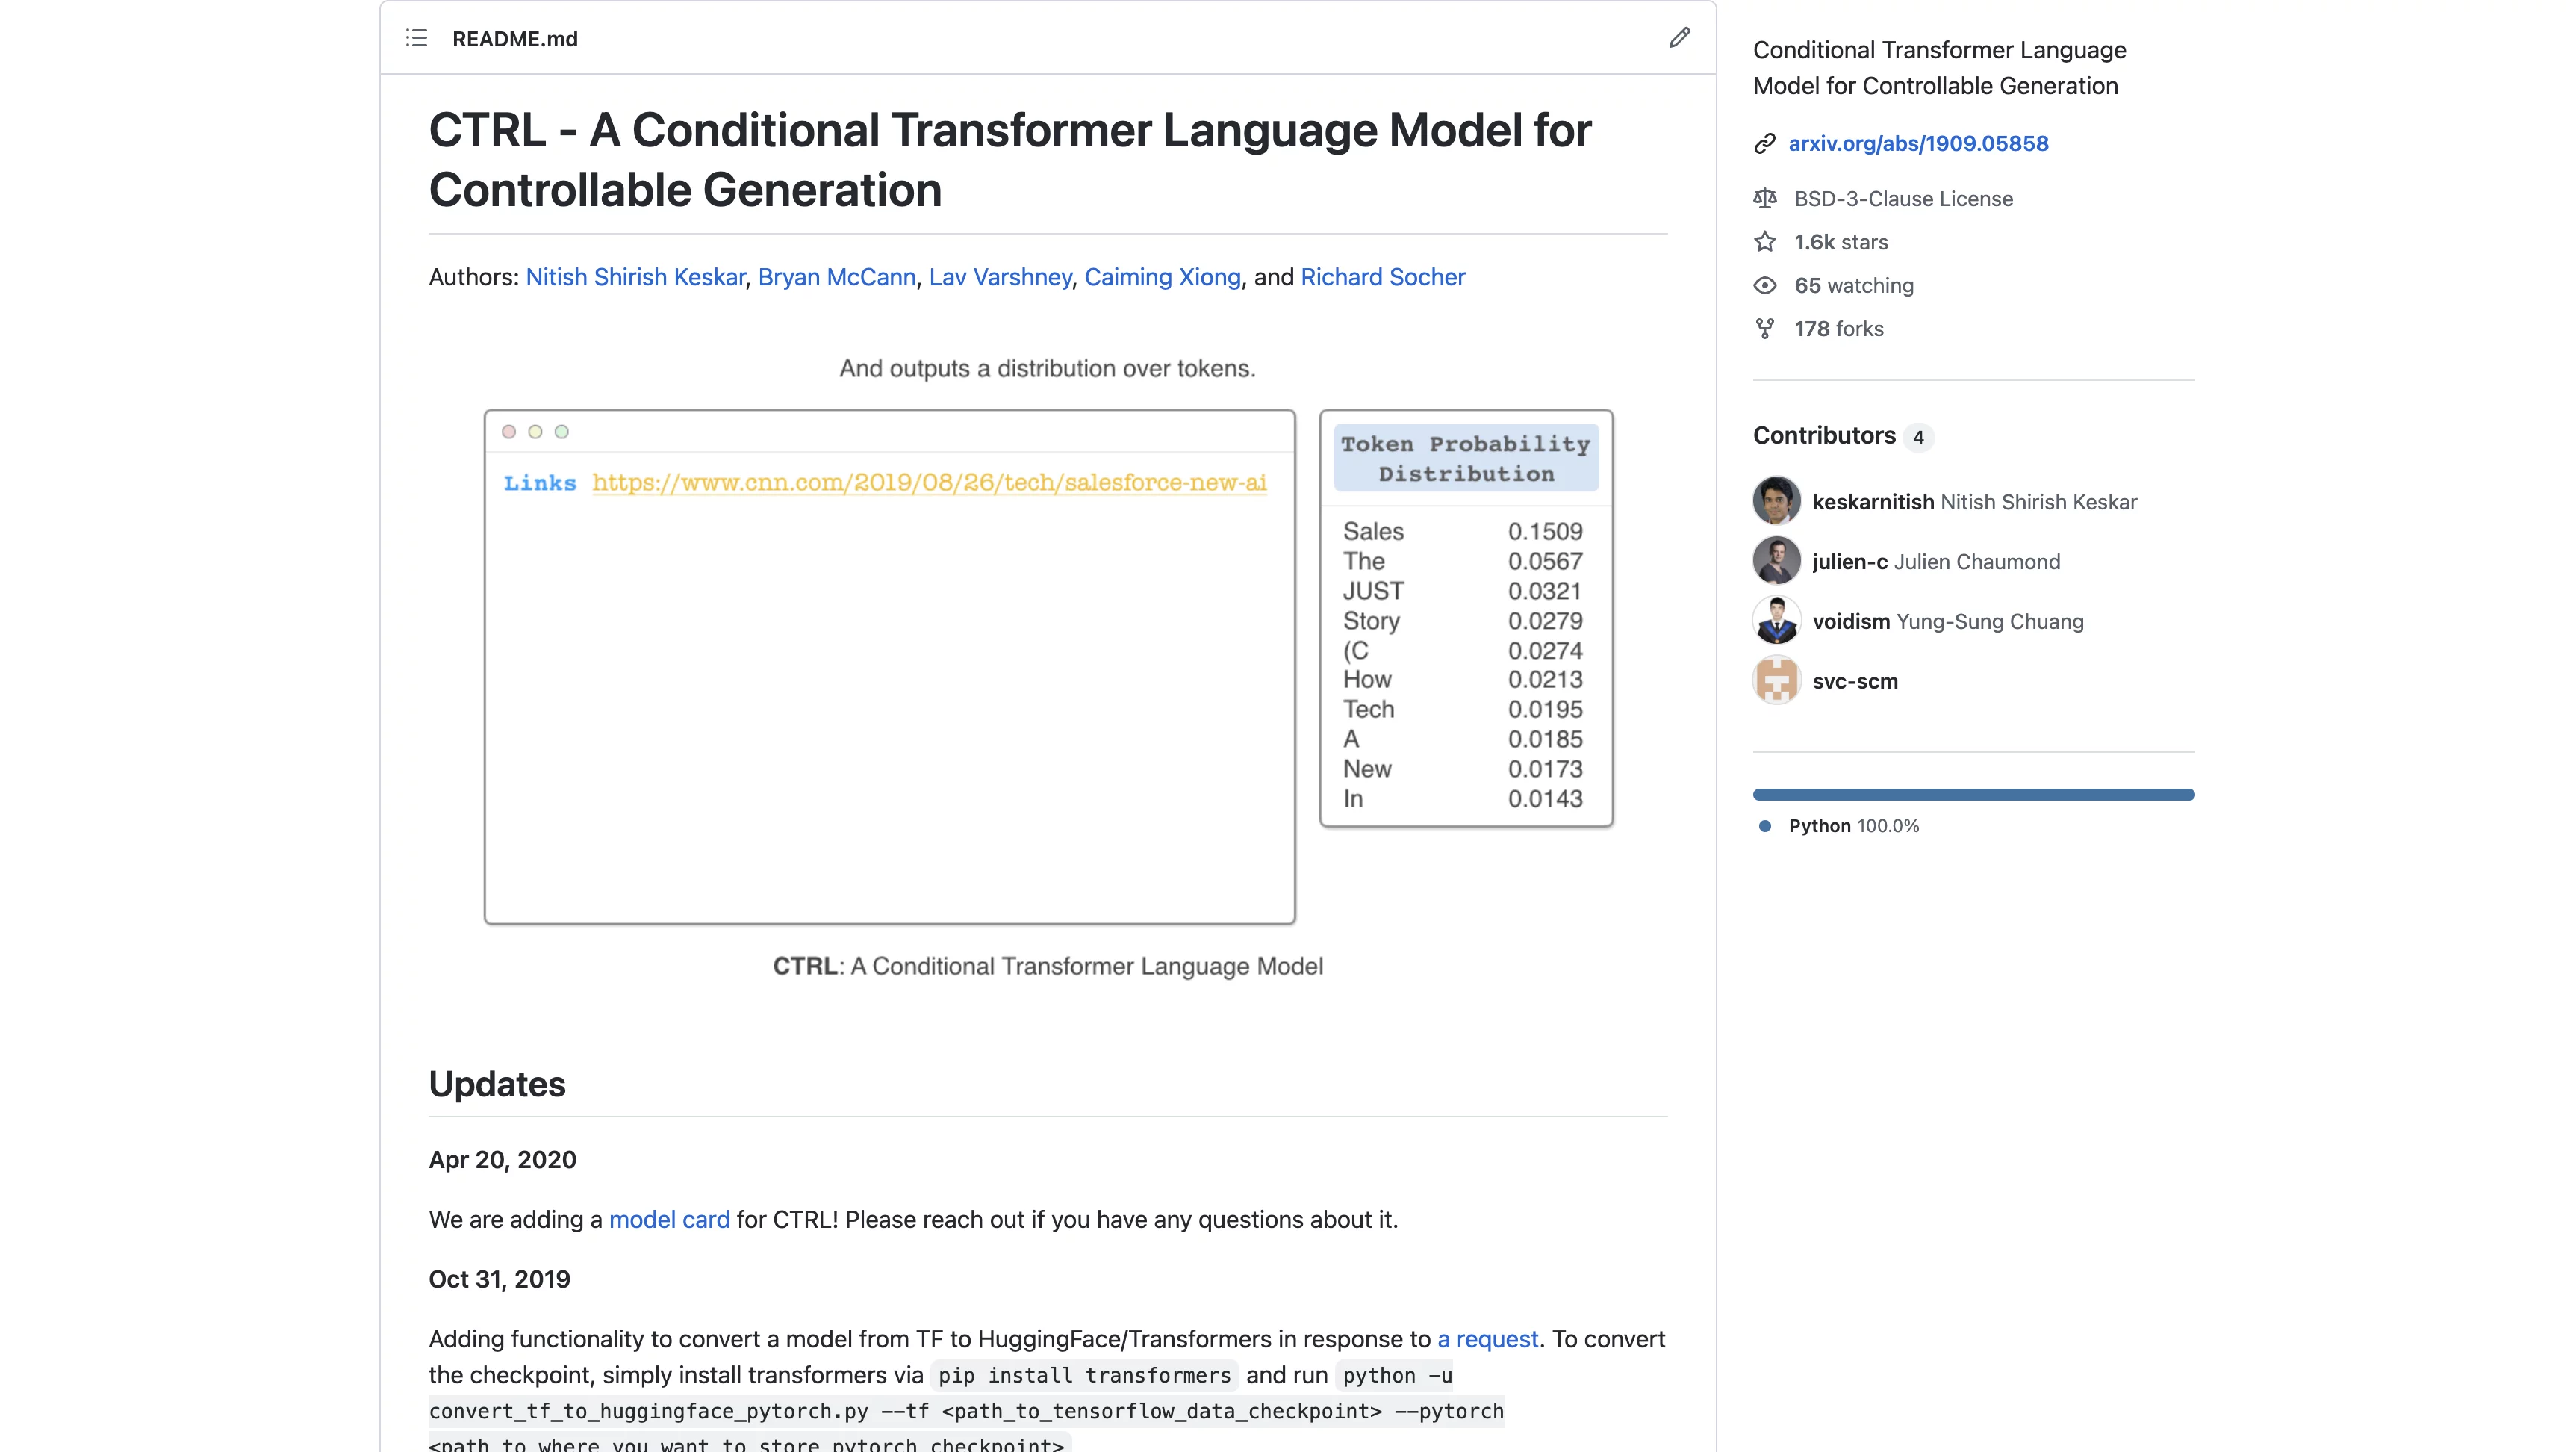  A Conditional Transformer Language Model for